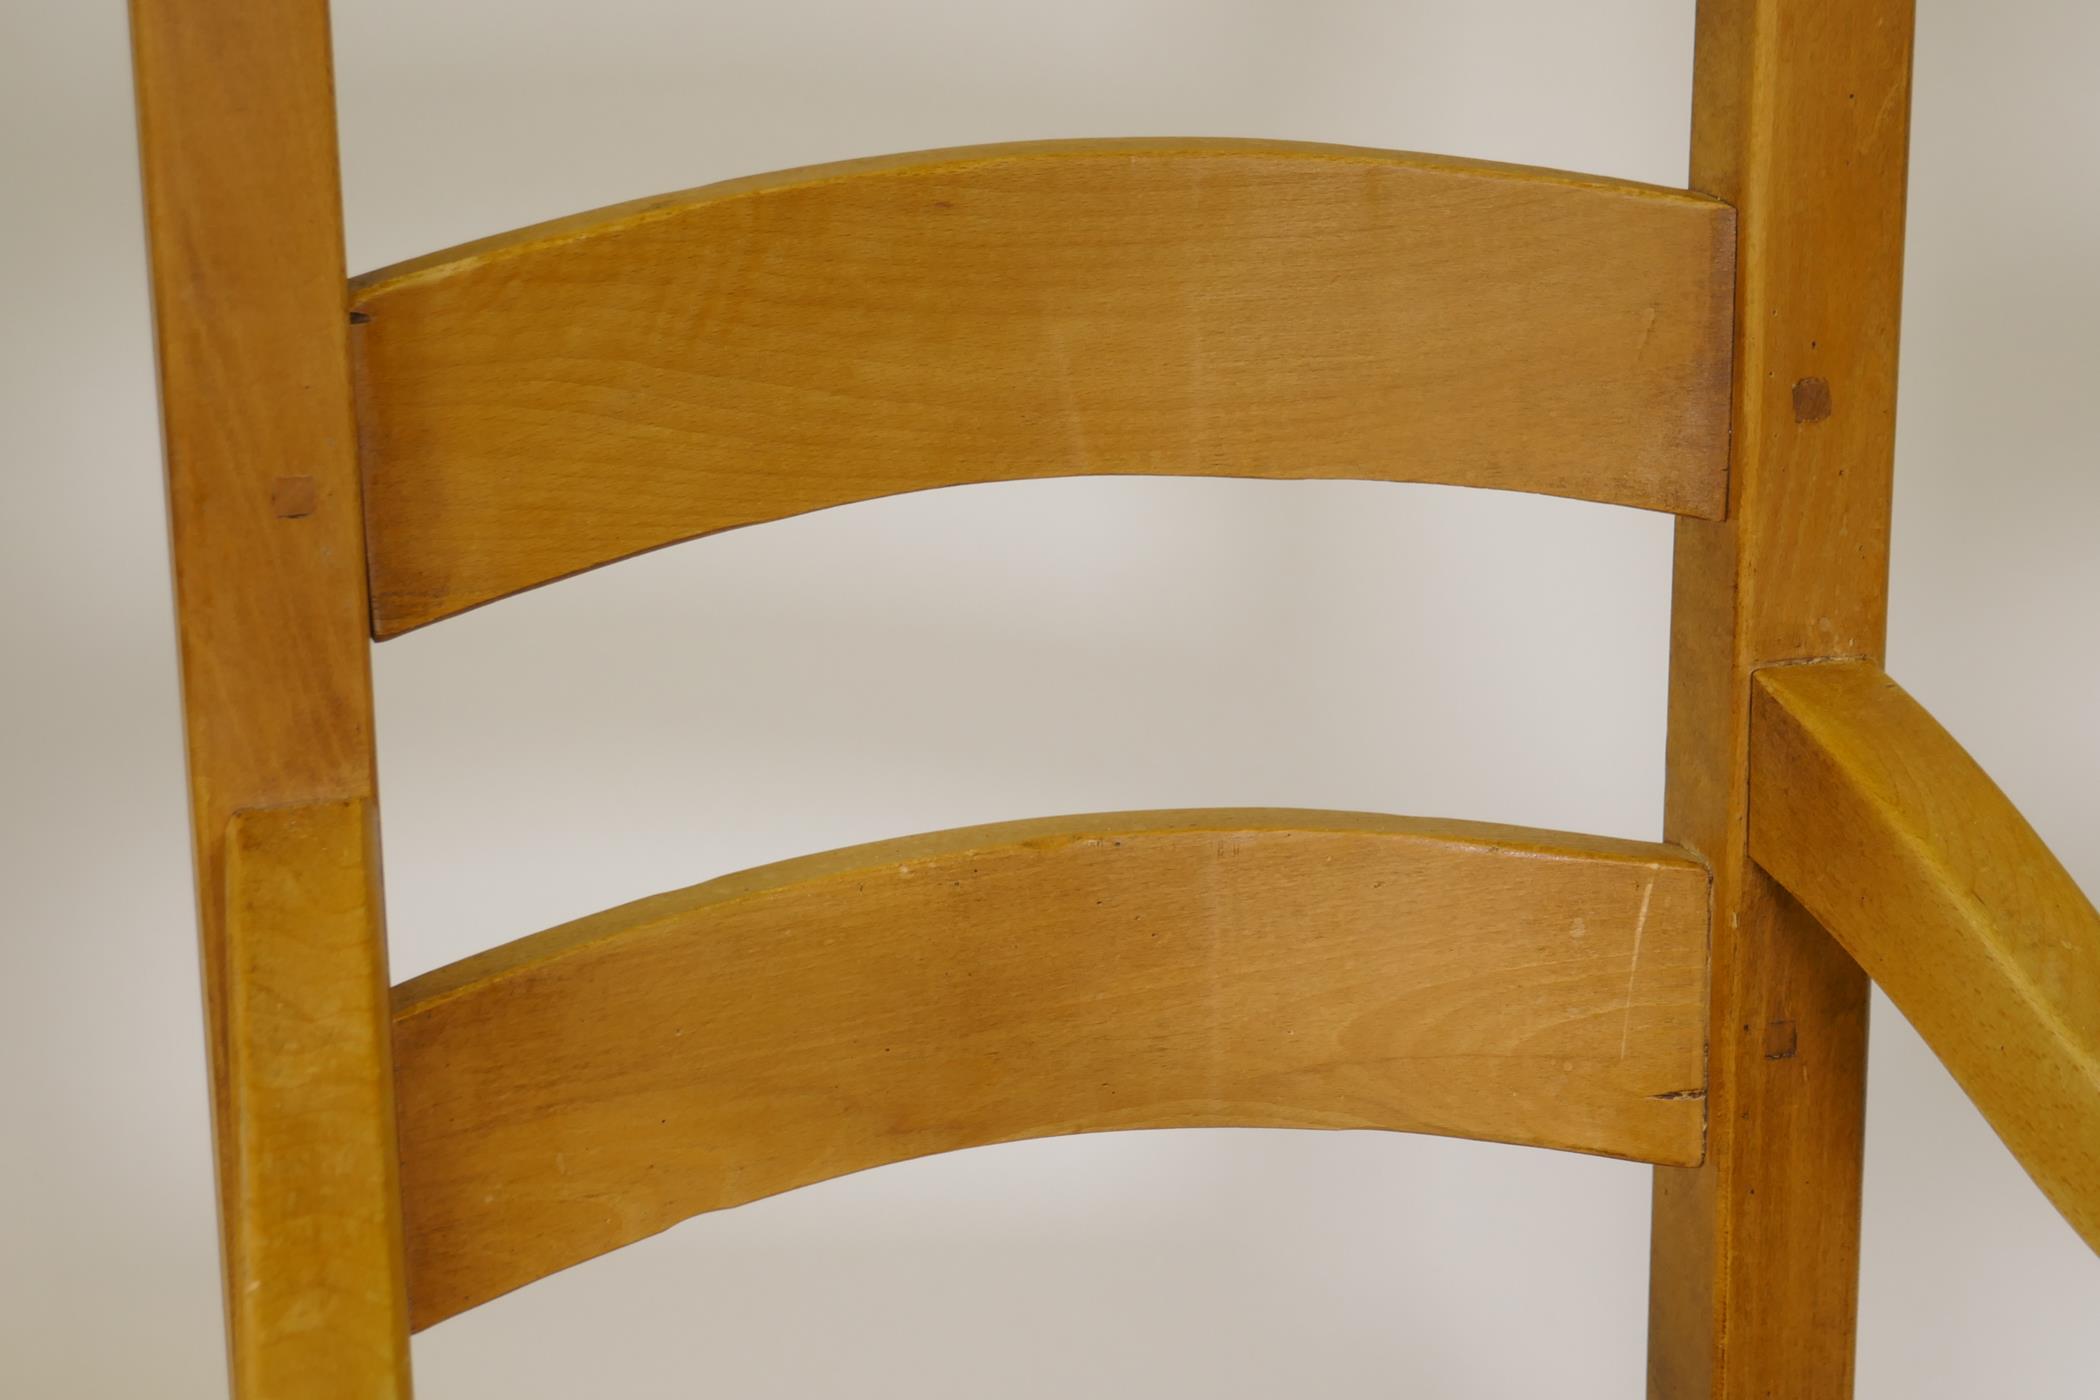 A beech wood ladderback rocking chair with rush seat - Image 2 of 4